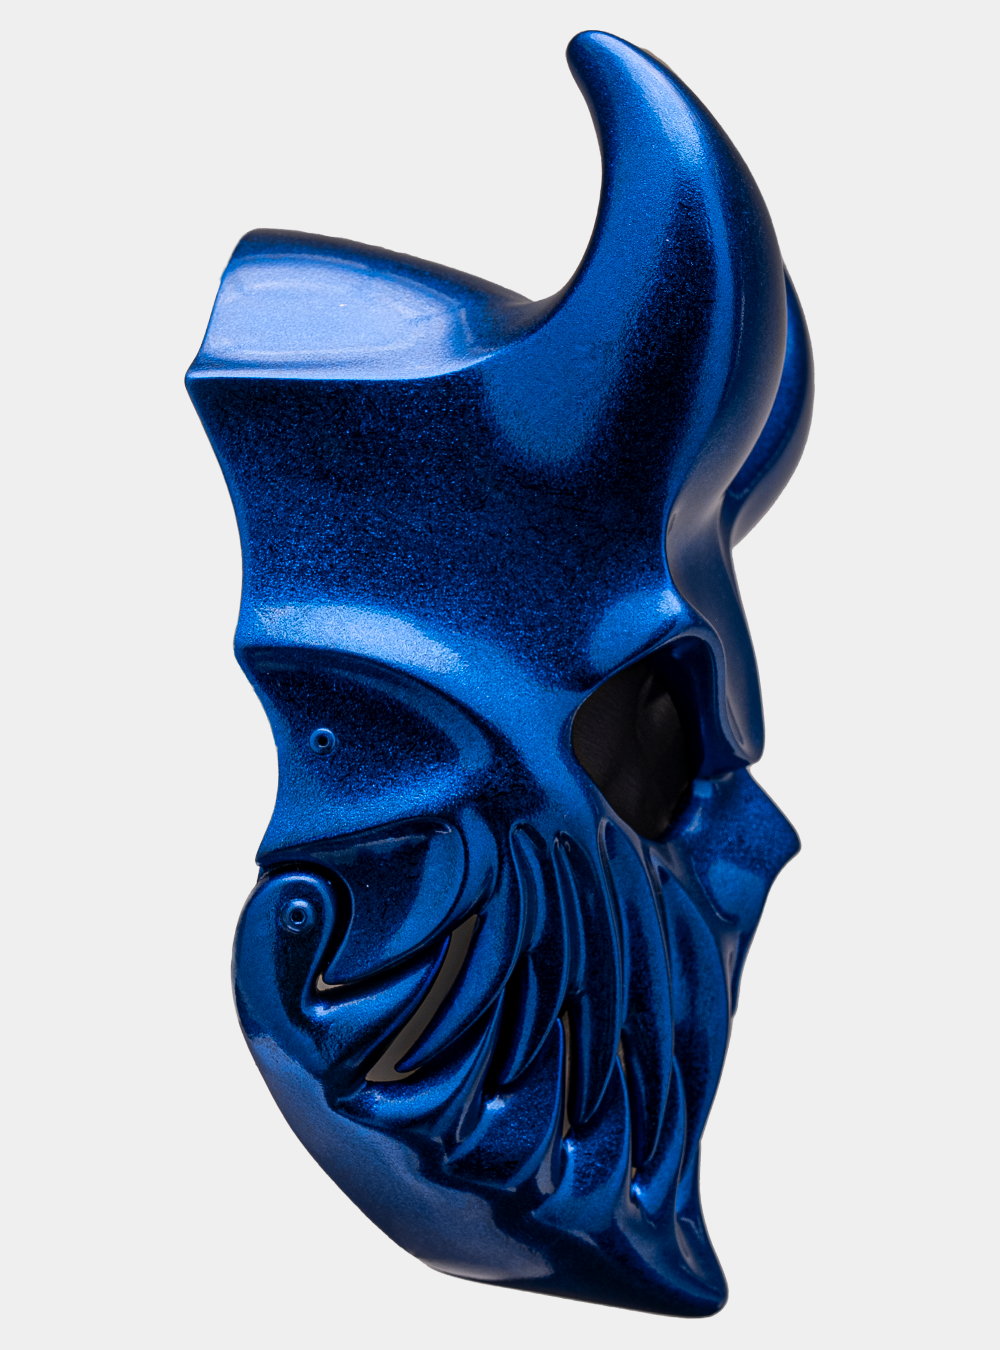 (SLAUGHTER TO PREVAIL) ALEX TERRIBLE MASK “KID OF DARKNESS” (ULTRAMARINE BLUE)